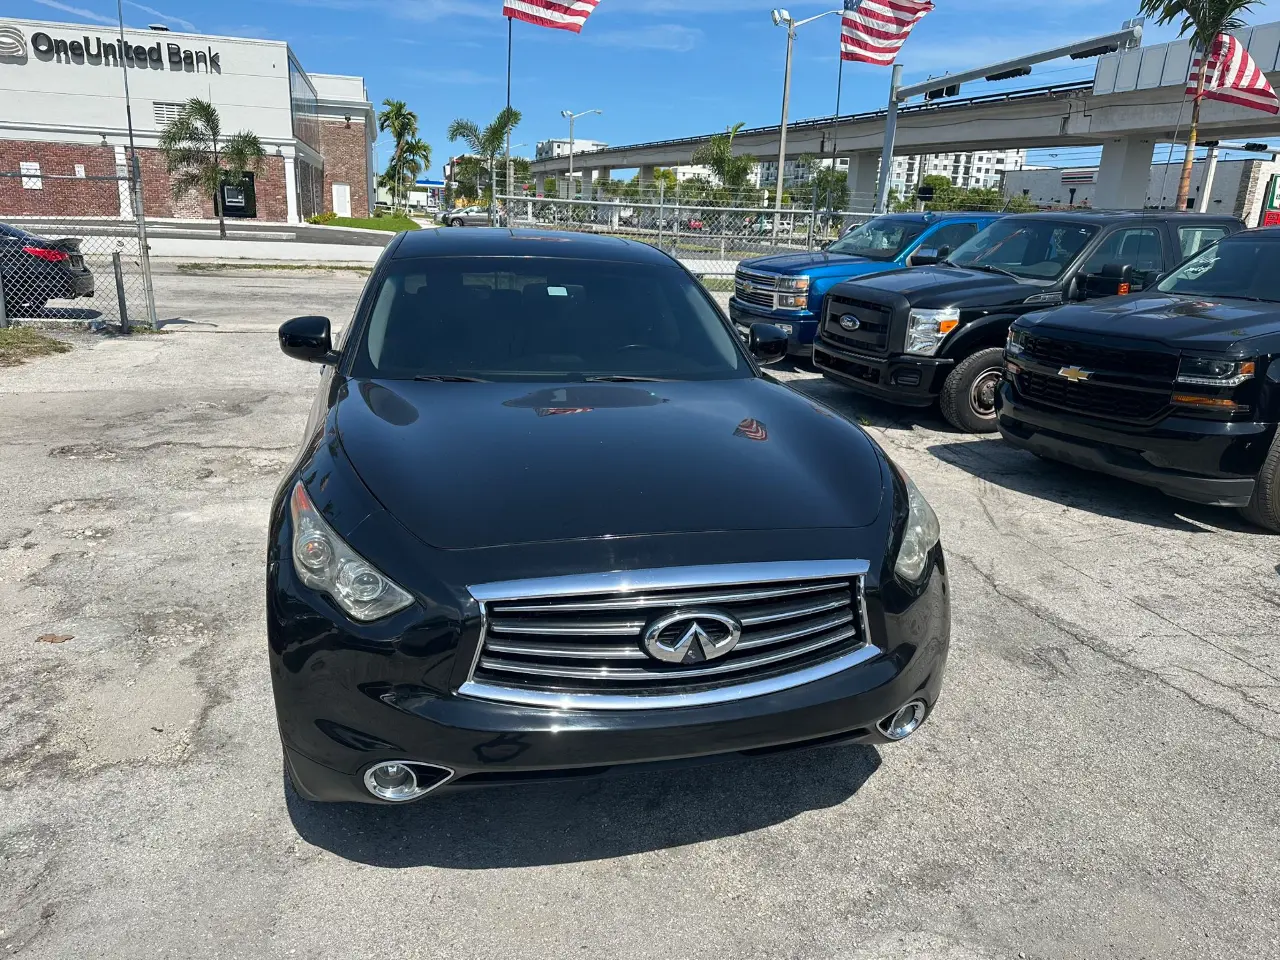 used 2016 Infiniti Qx70 - front view 2